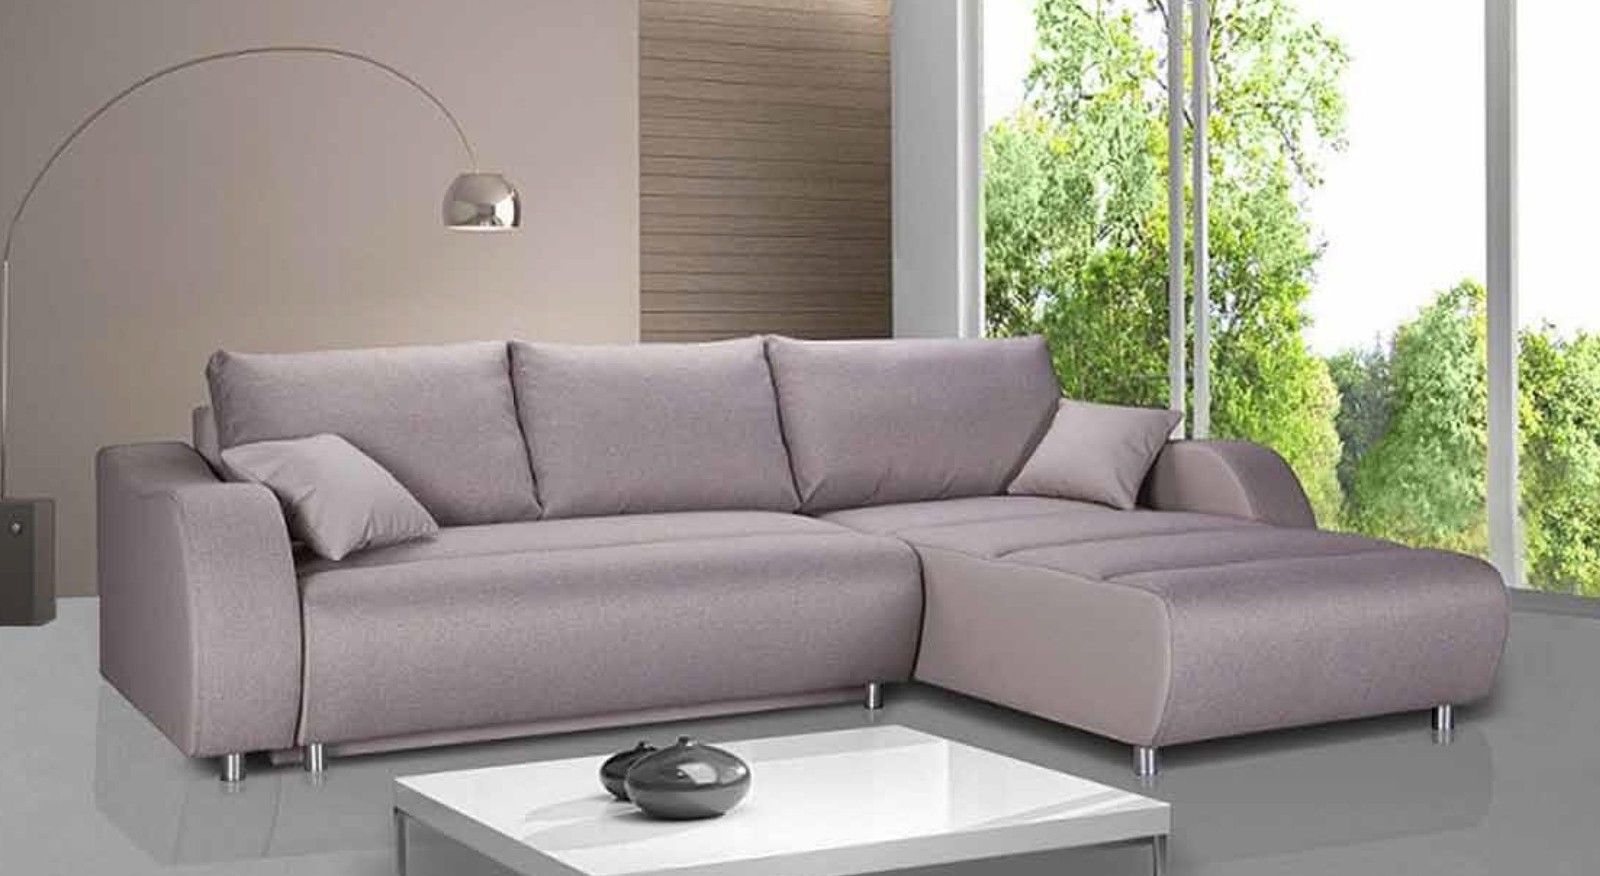 affordable sofas ... corner sofa bed fabric grey surf sofadiscount also corner sectional  couches KENRLEY